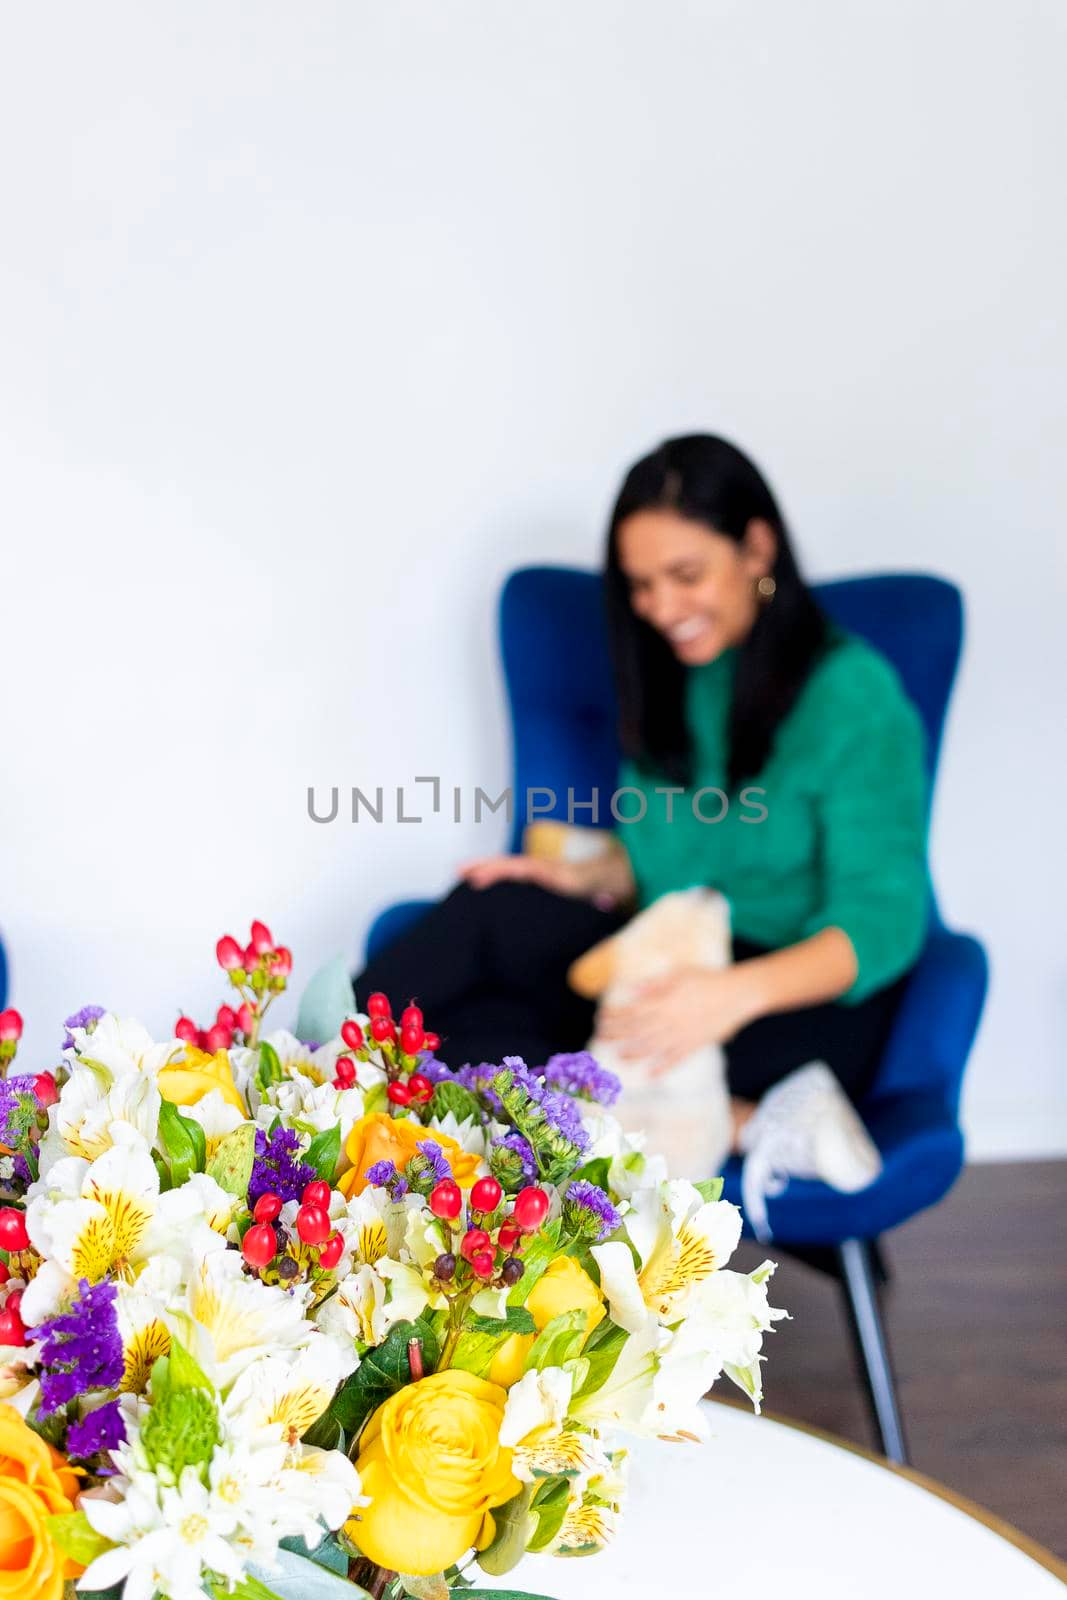 Beauty young woman stroking your pet in the living home flower arrangement in your home by eagg13